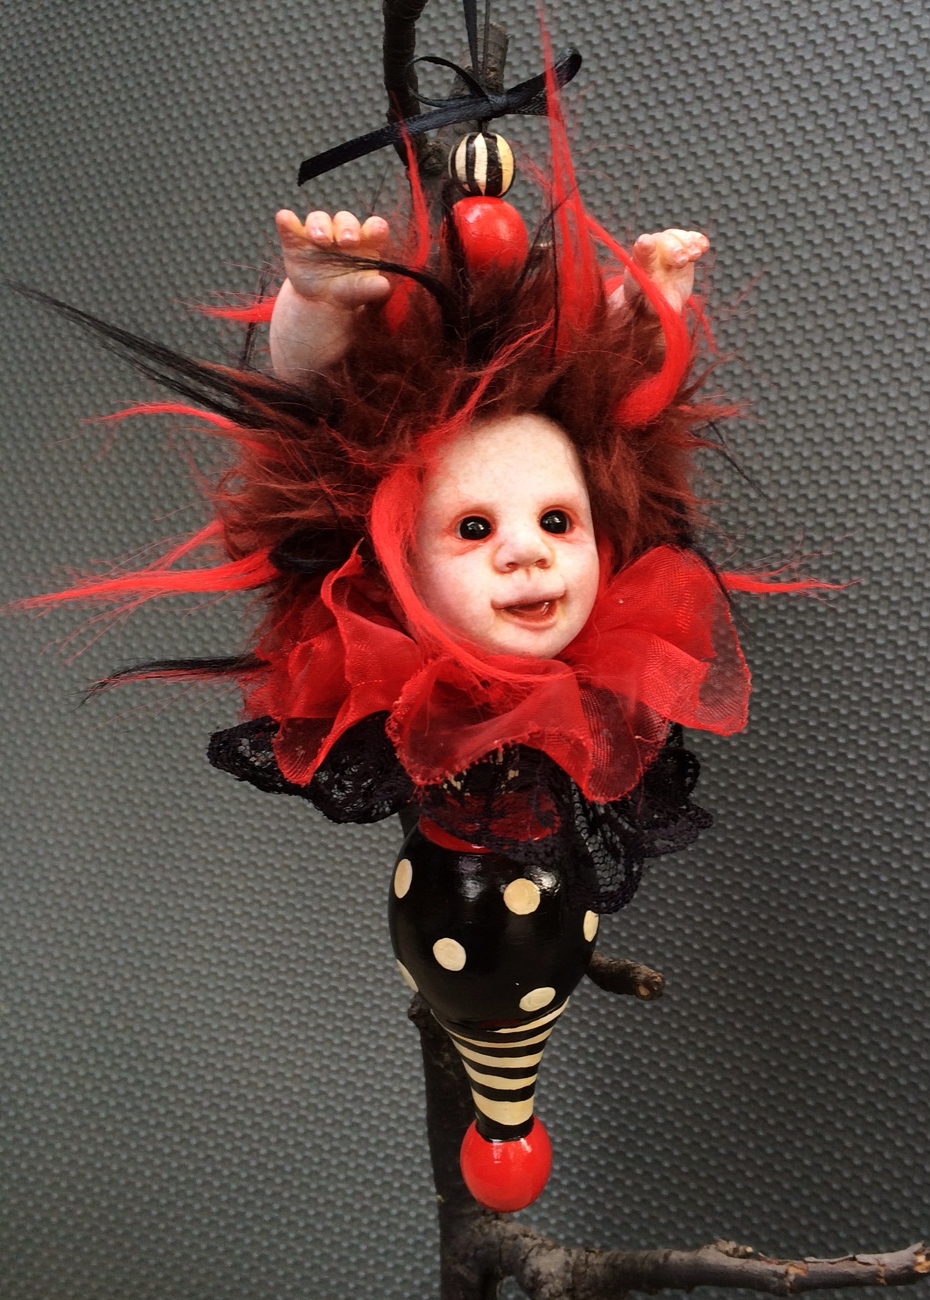 hand painted vinyl doll head with red and black fur hair and doll hands coming out of it's head black lace collar attached to hand painted finial gothic Christmas tree holiday ornament